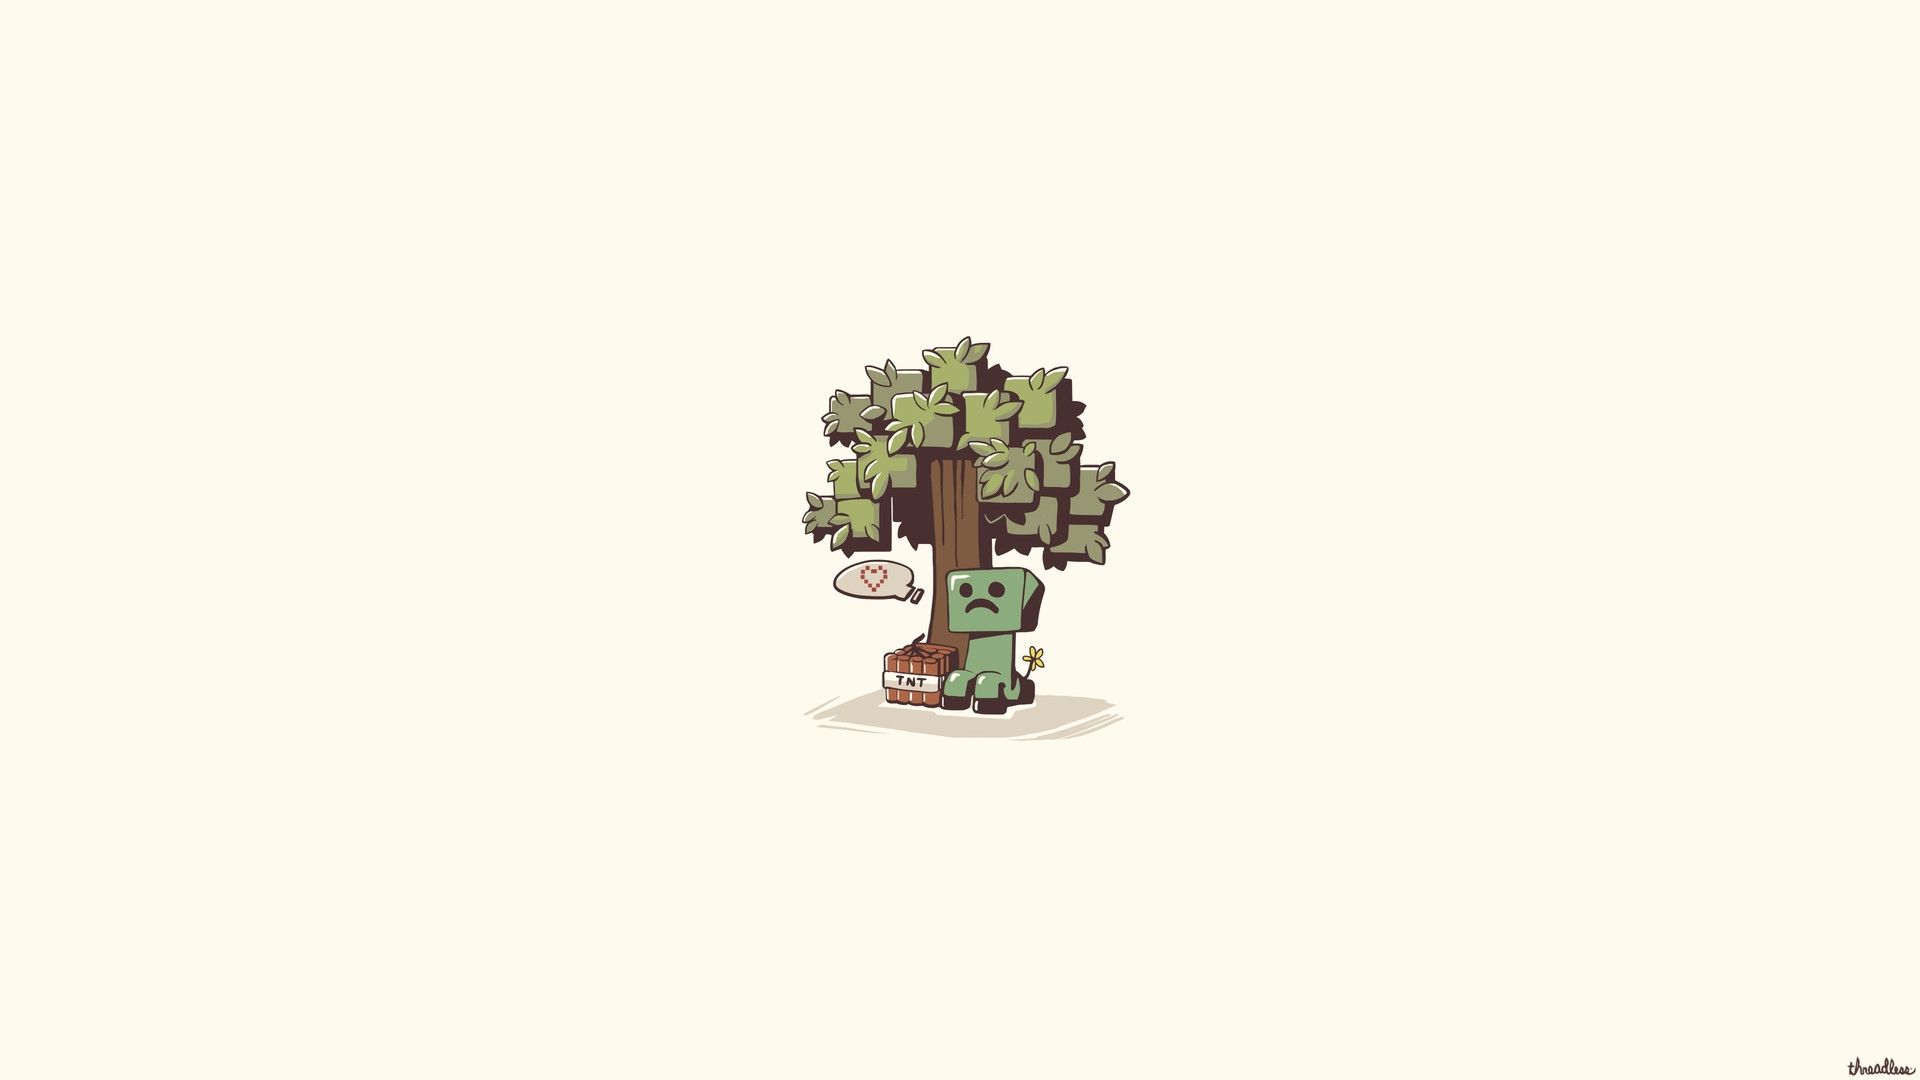 A minecraft tree with an animal on it - Animal Crossing